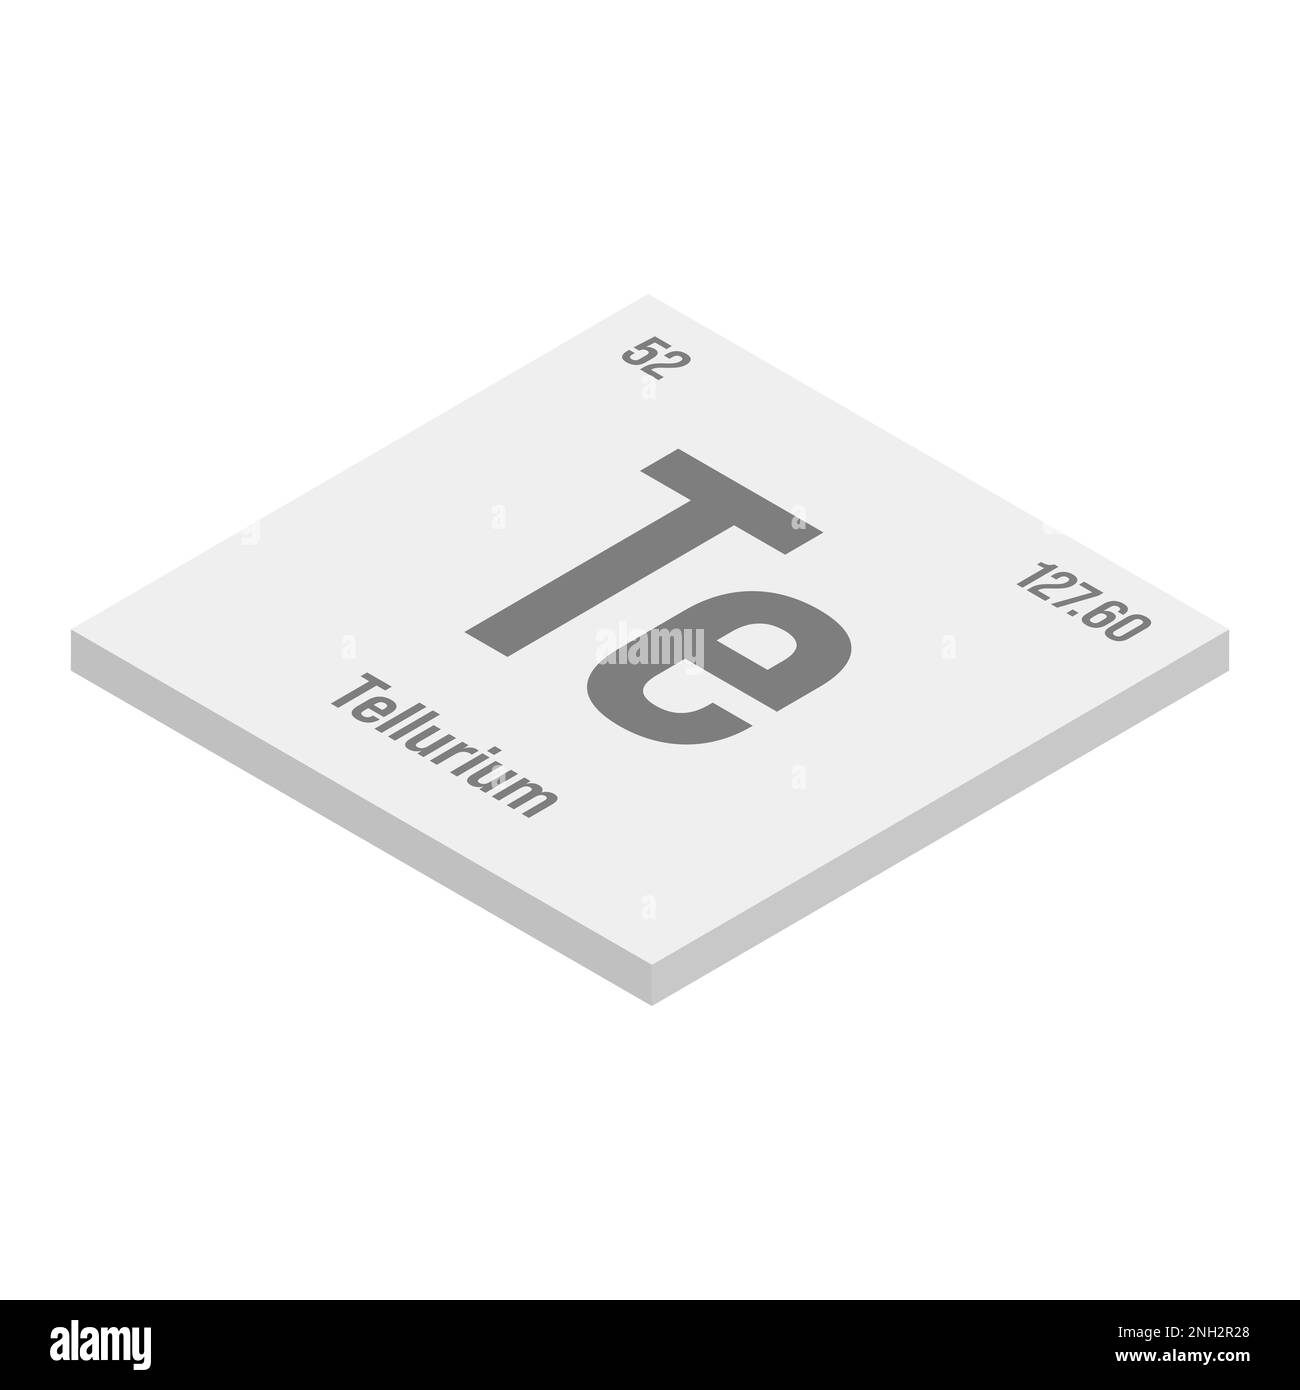 Tellurium, Te, gray 3D isometric illustration of periodic table element with name, symbol, atomic number and weight. Metalloid with various industrial uses, such as in certain types of glass, solar cells, and as a component in certain types of medication. Stock Vector